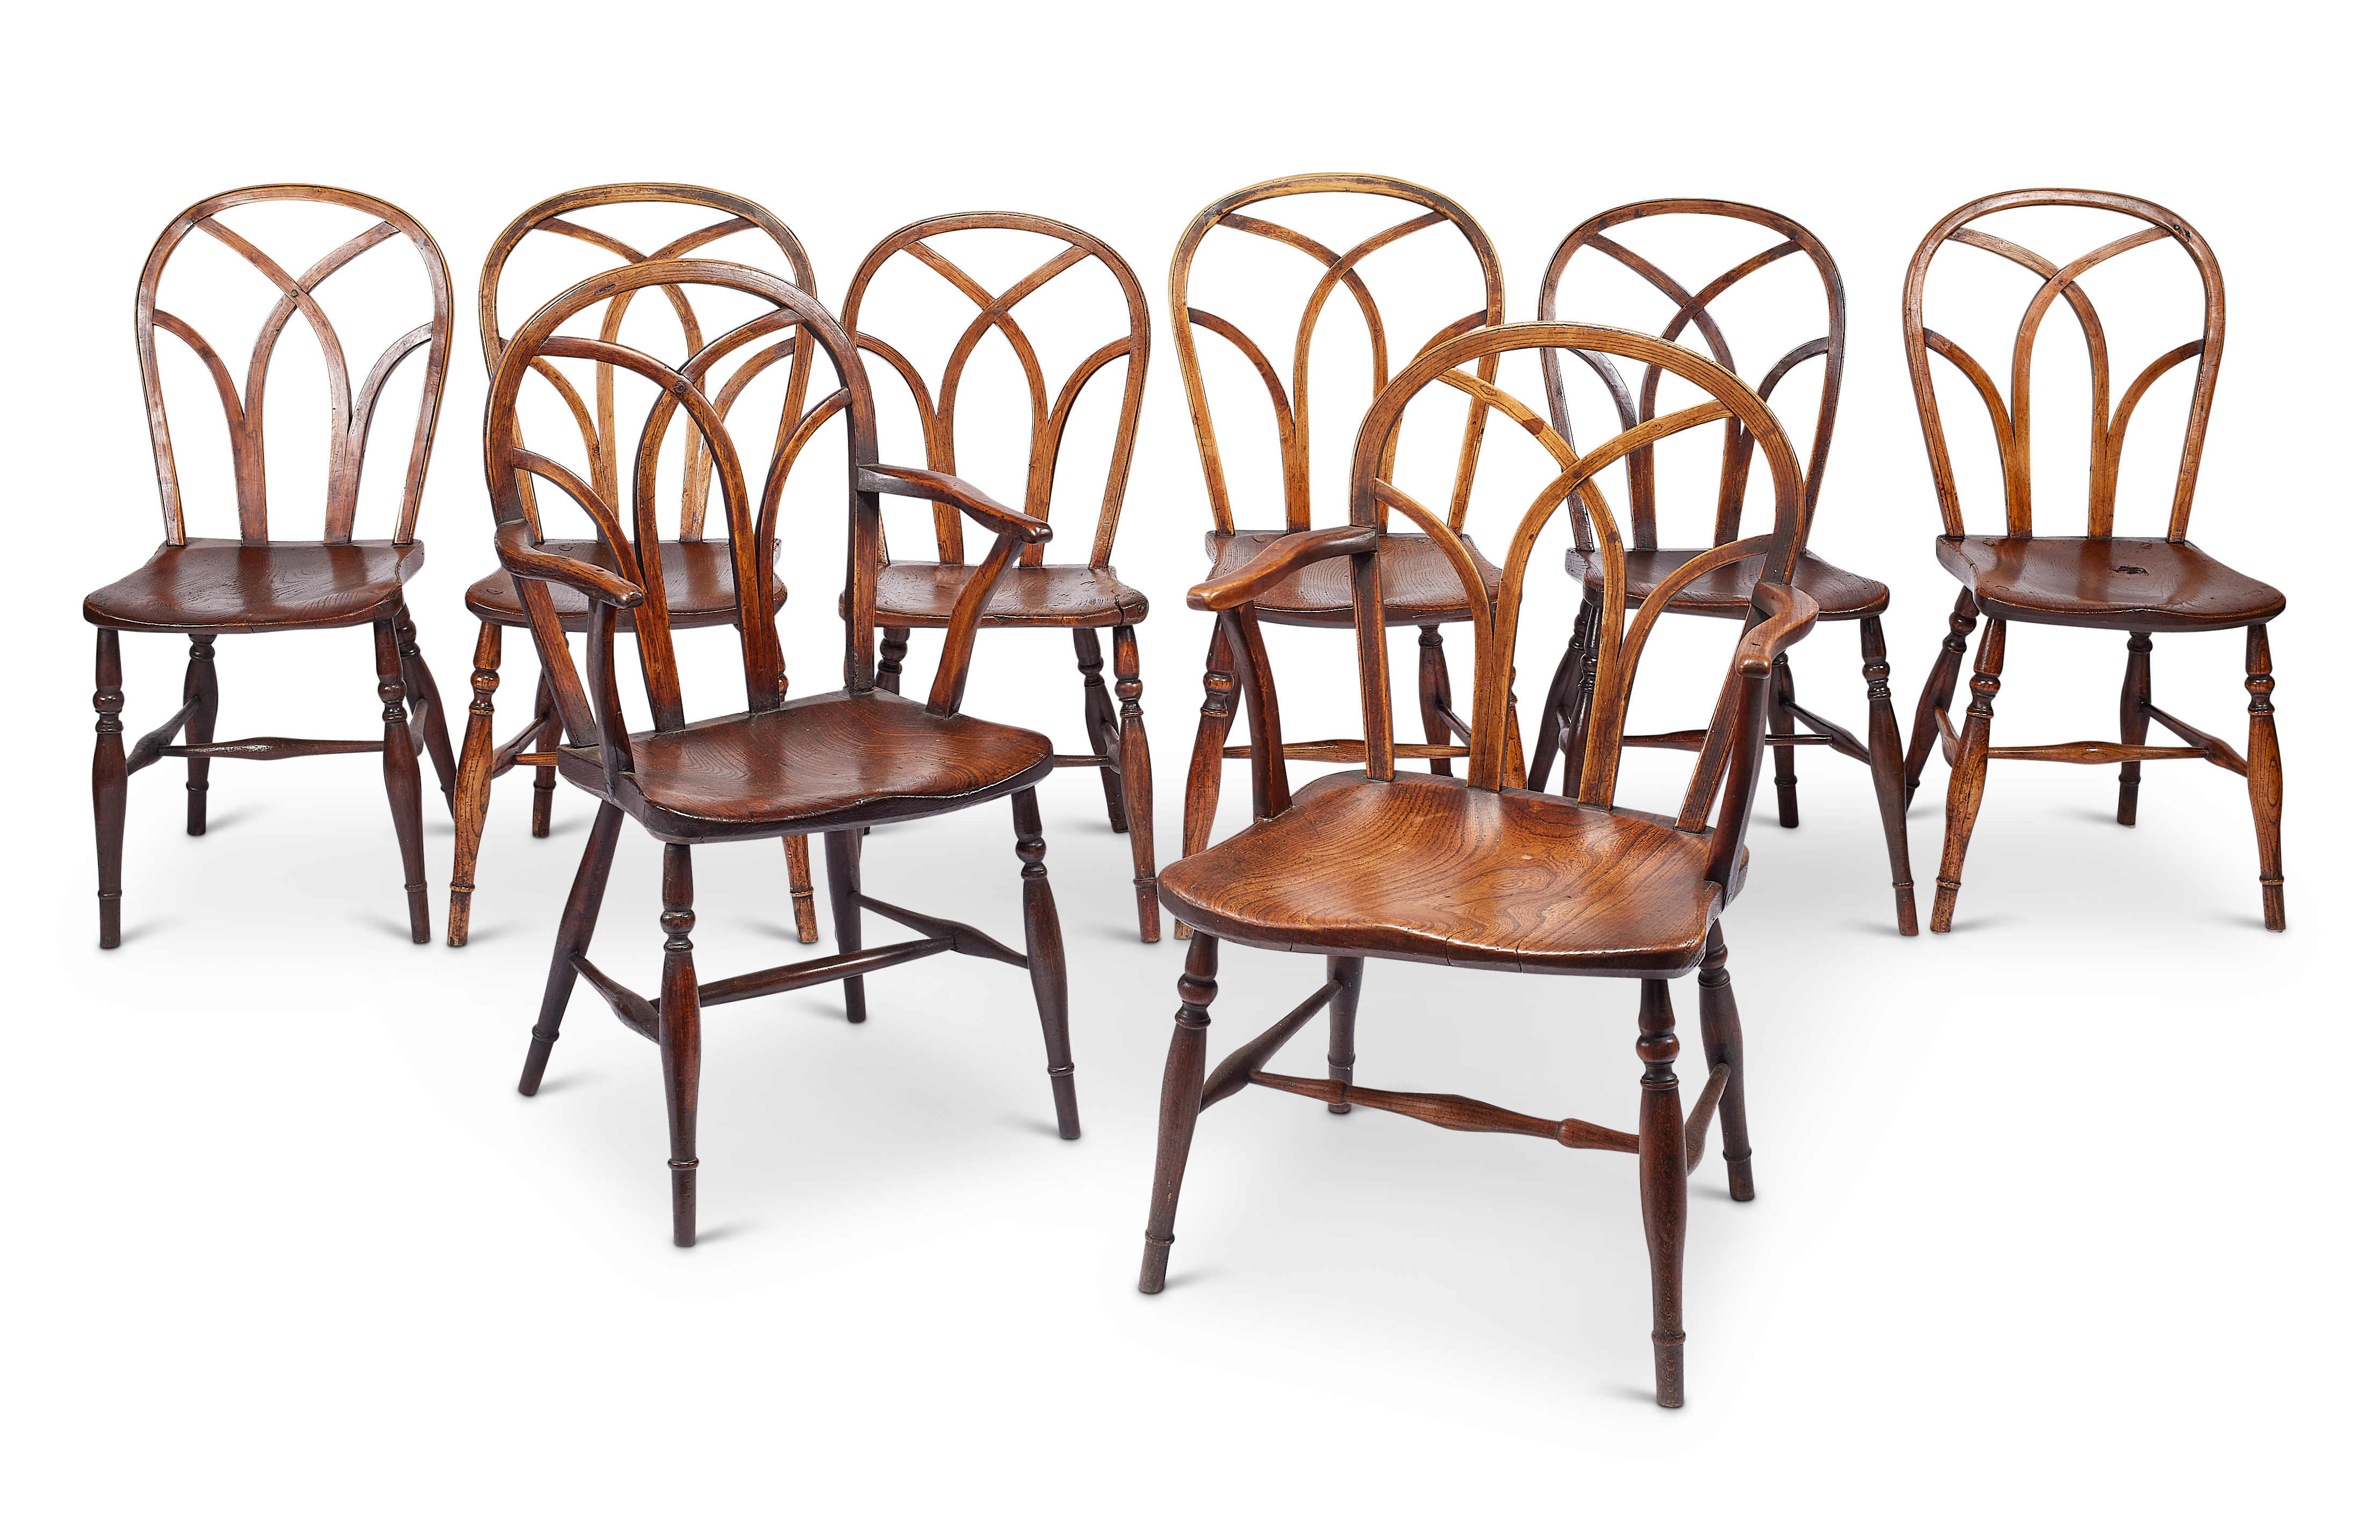 A matched set of eight George IV ‘Gothic’ Windsor chairs, Buckinghamshire